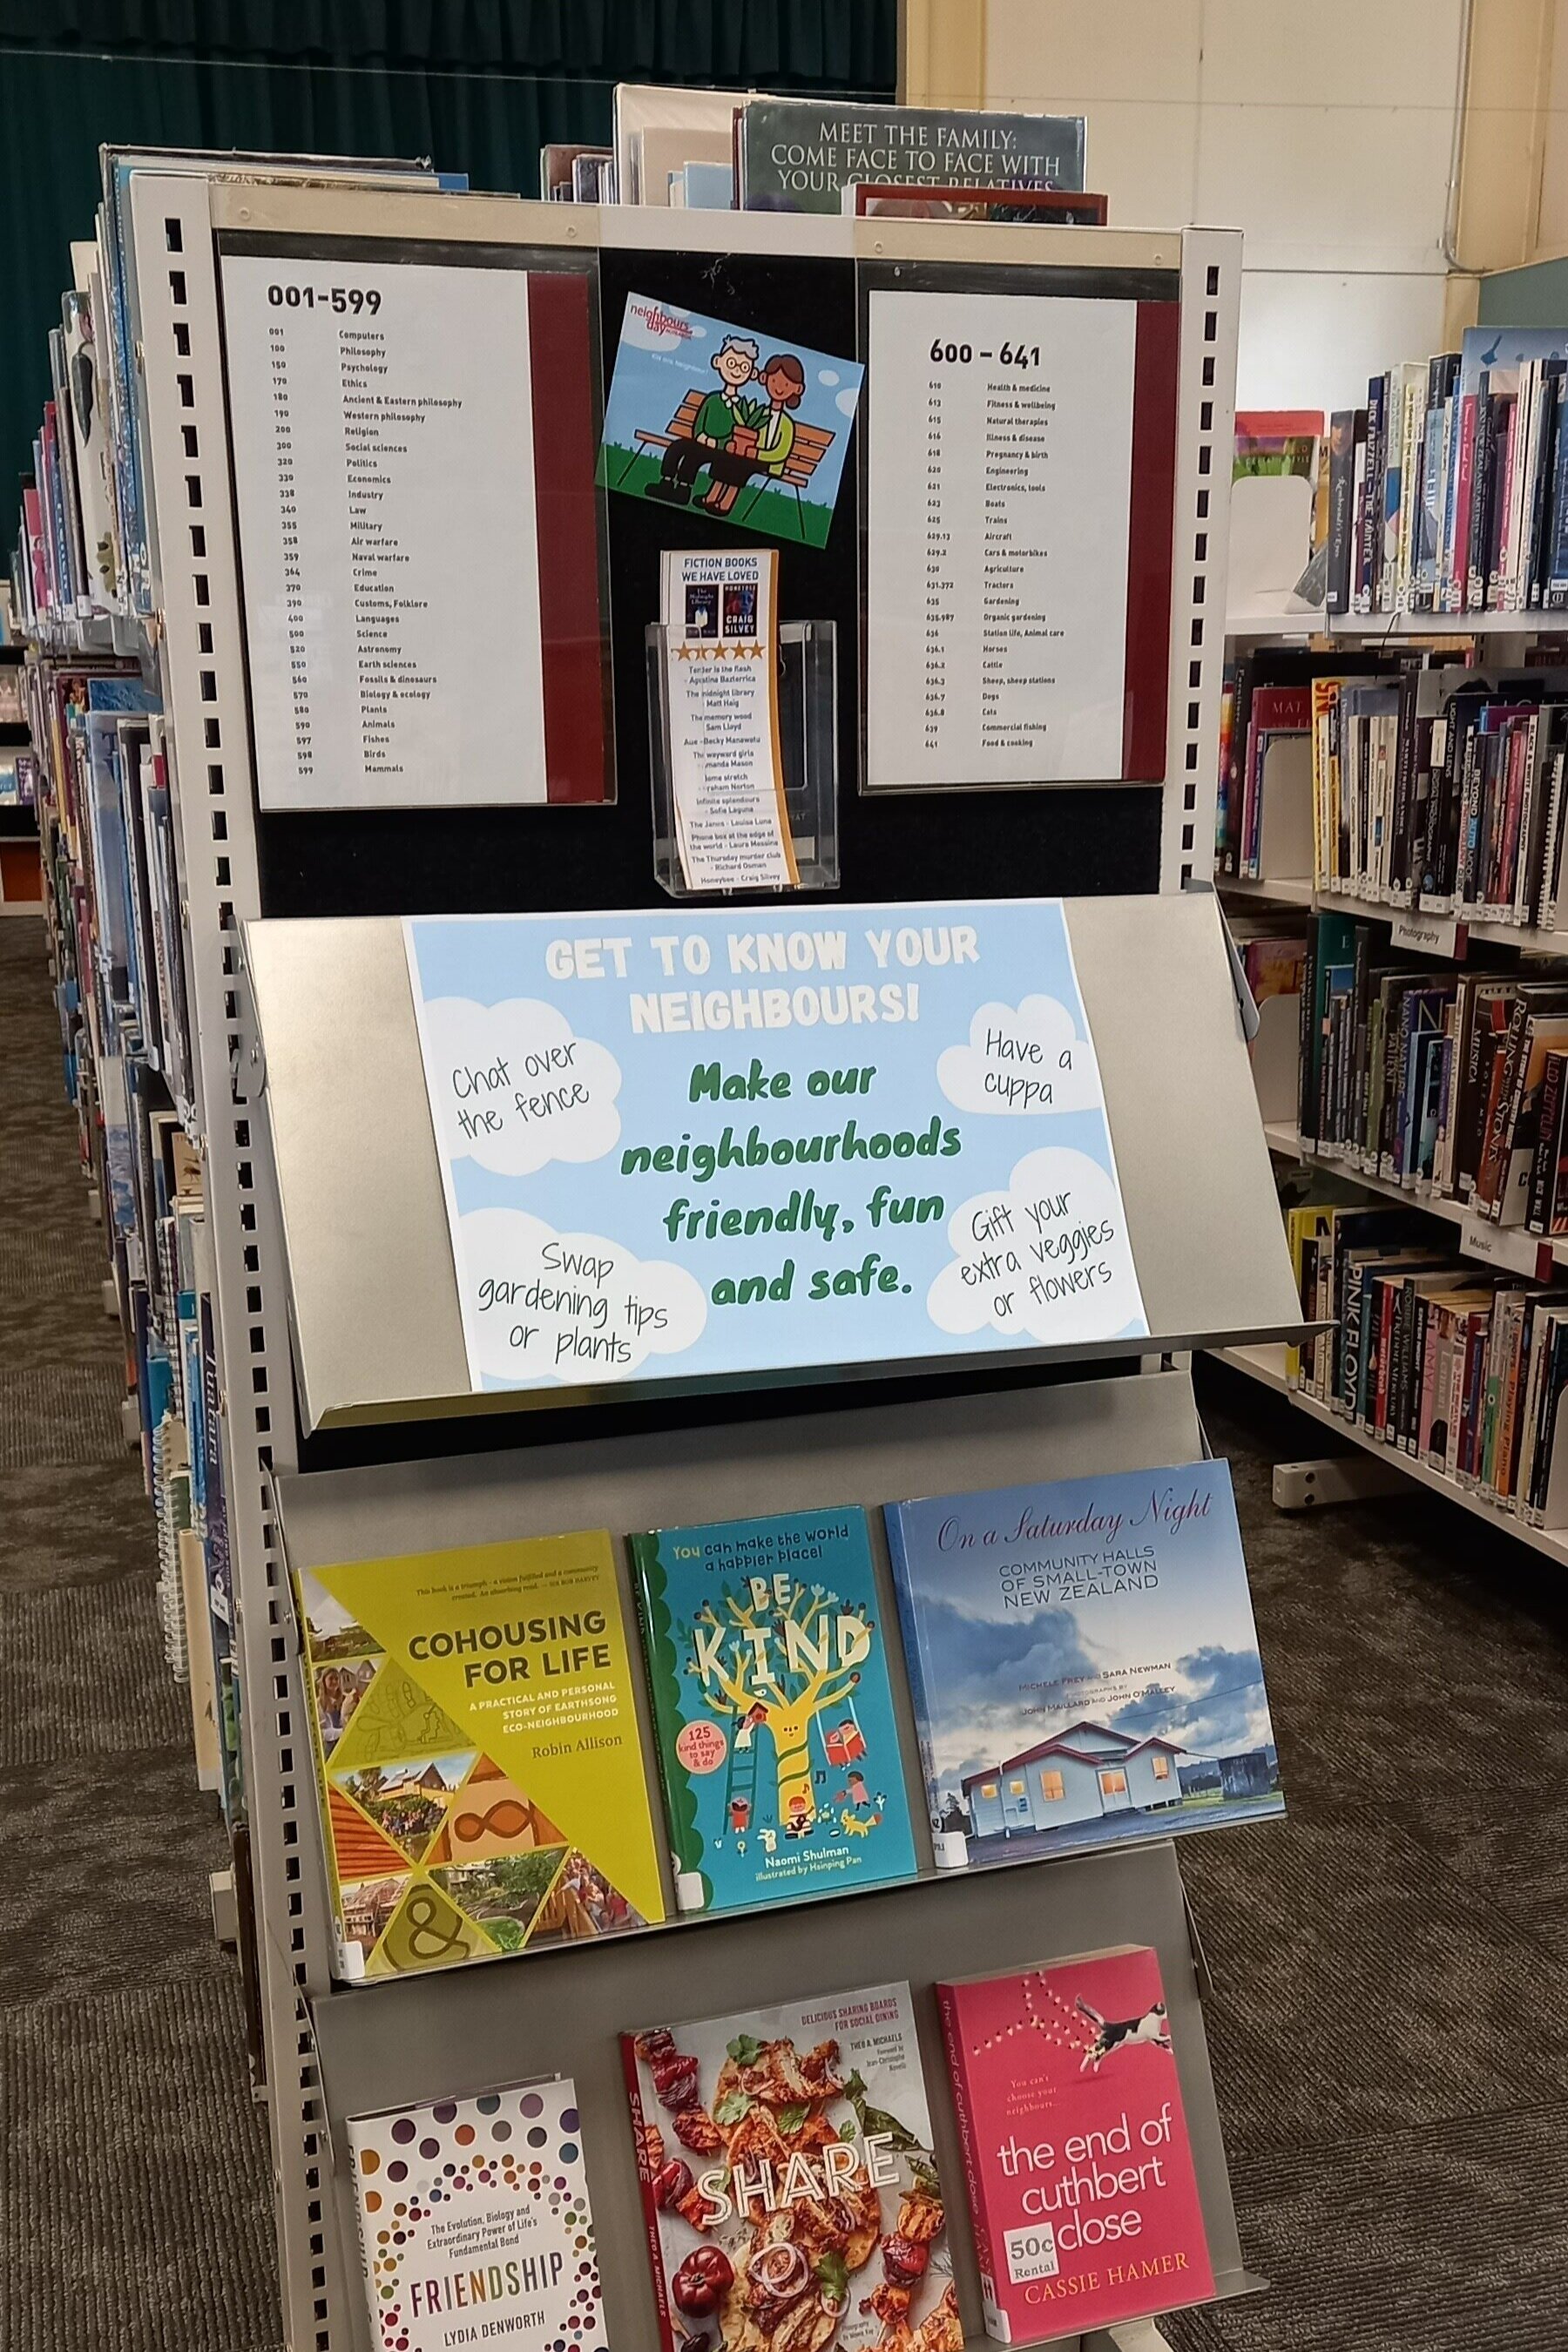 Gore and Mataura district libraries have put up displays of books to promote kindness and neighbourliness.